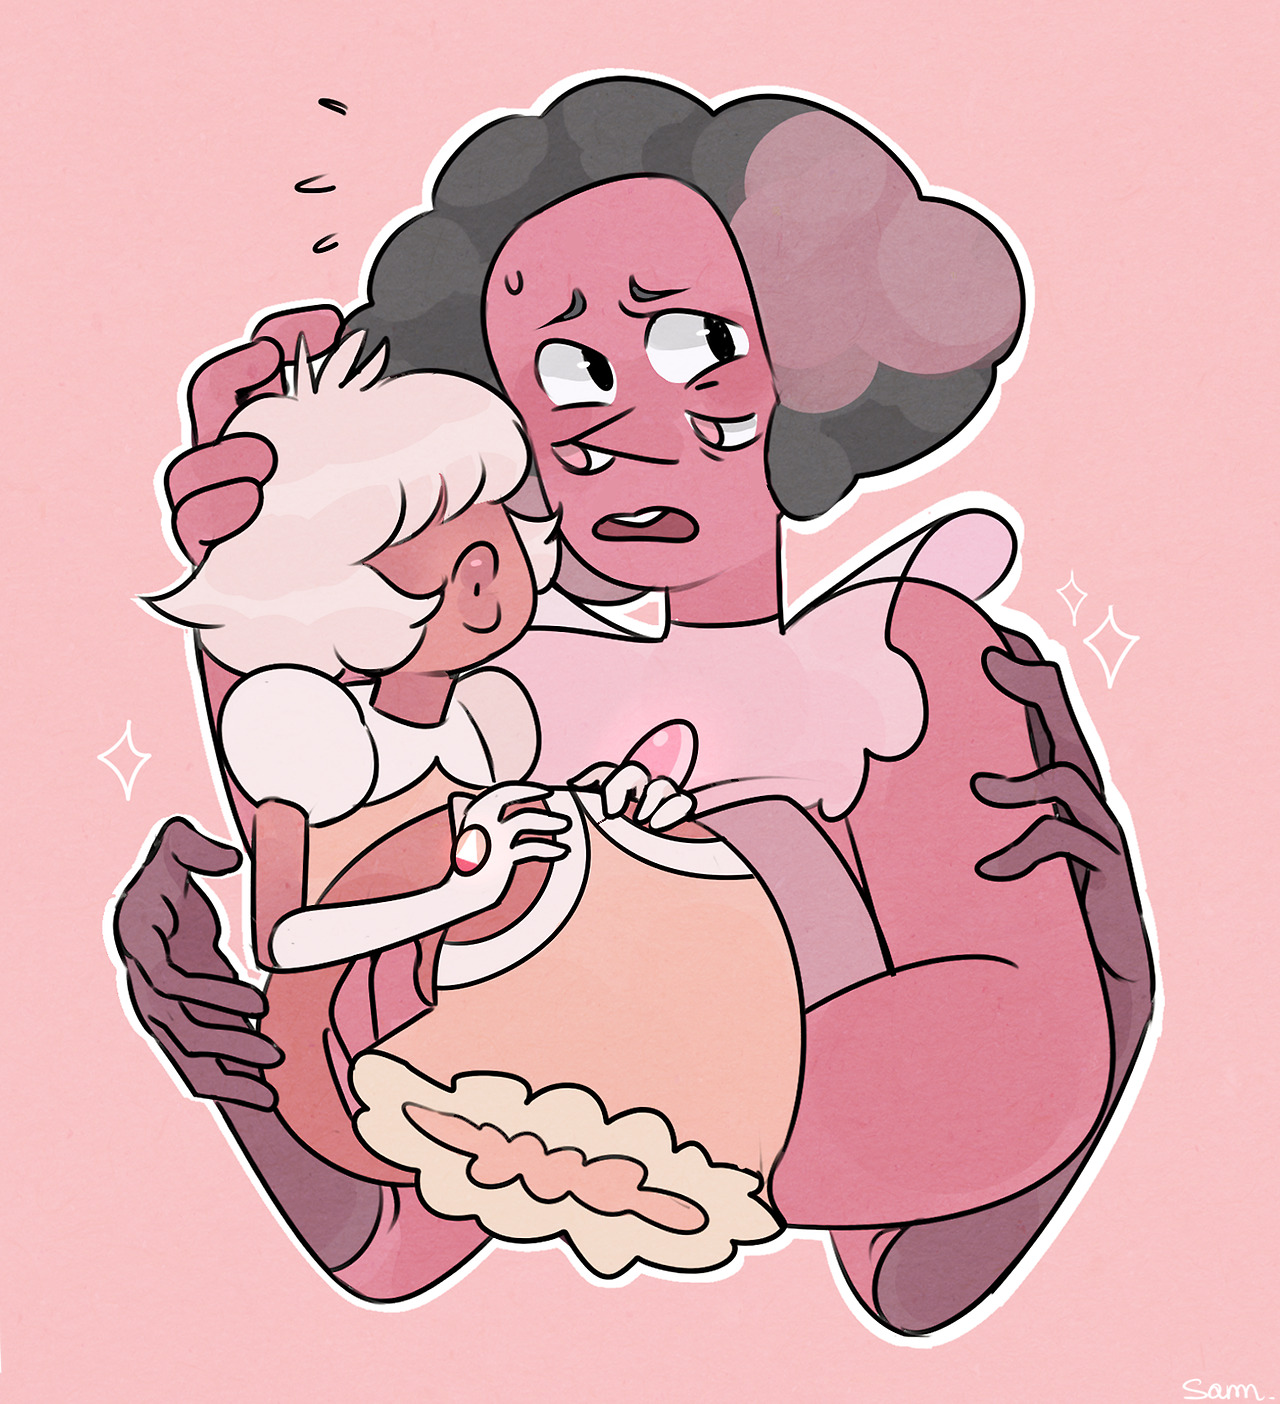 Rhodo and Pad! These two are so adorable… I think I can draw them other times in the future